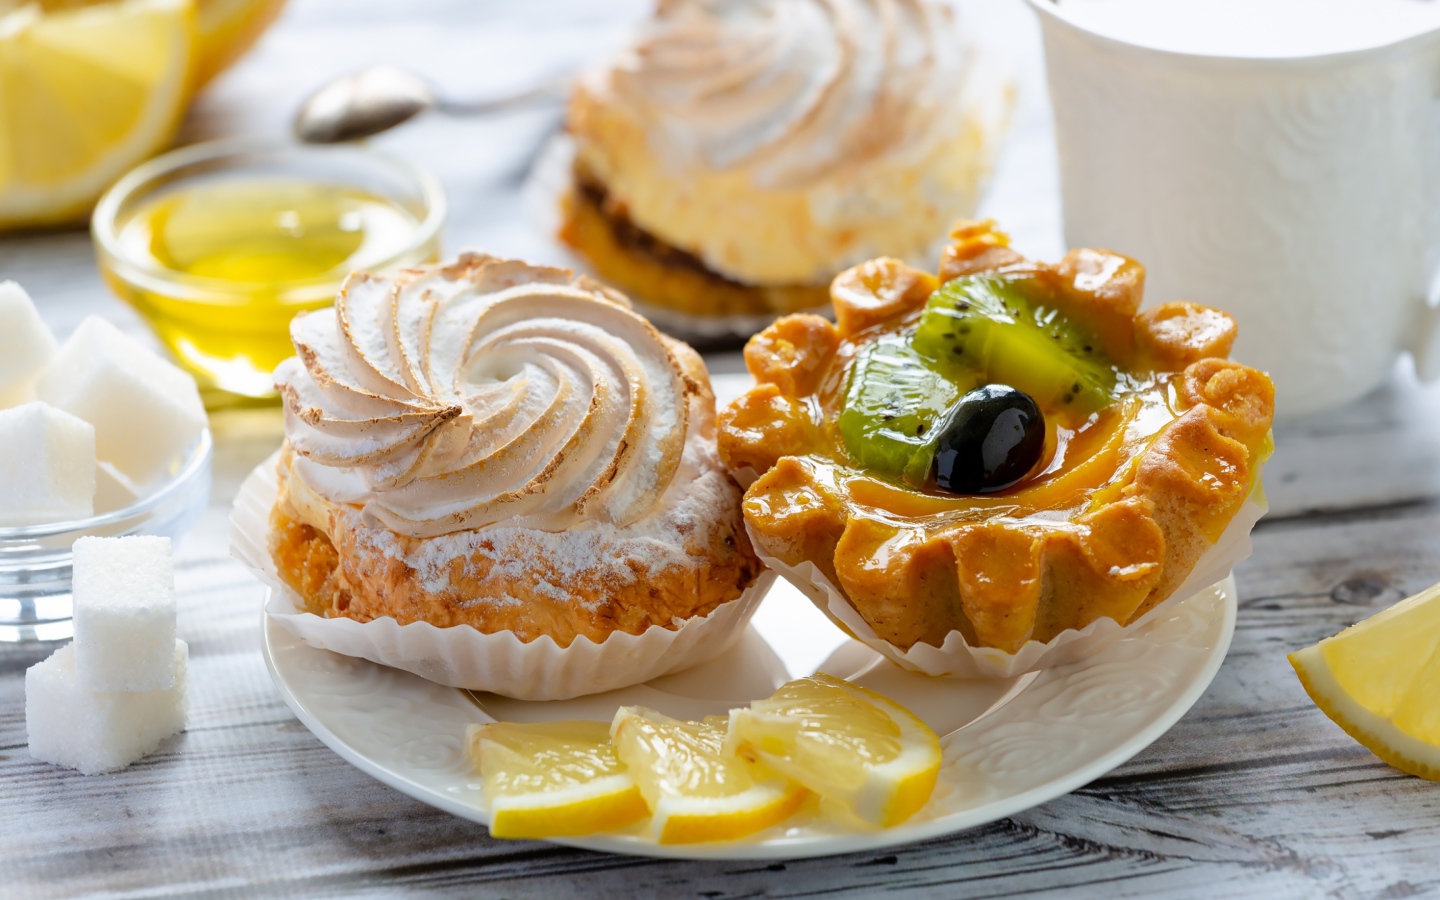 Tasty delicious pastries on a plate with lemon